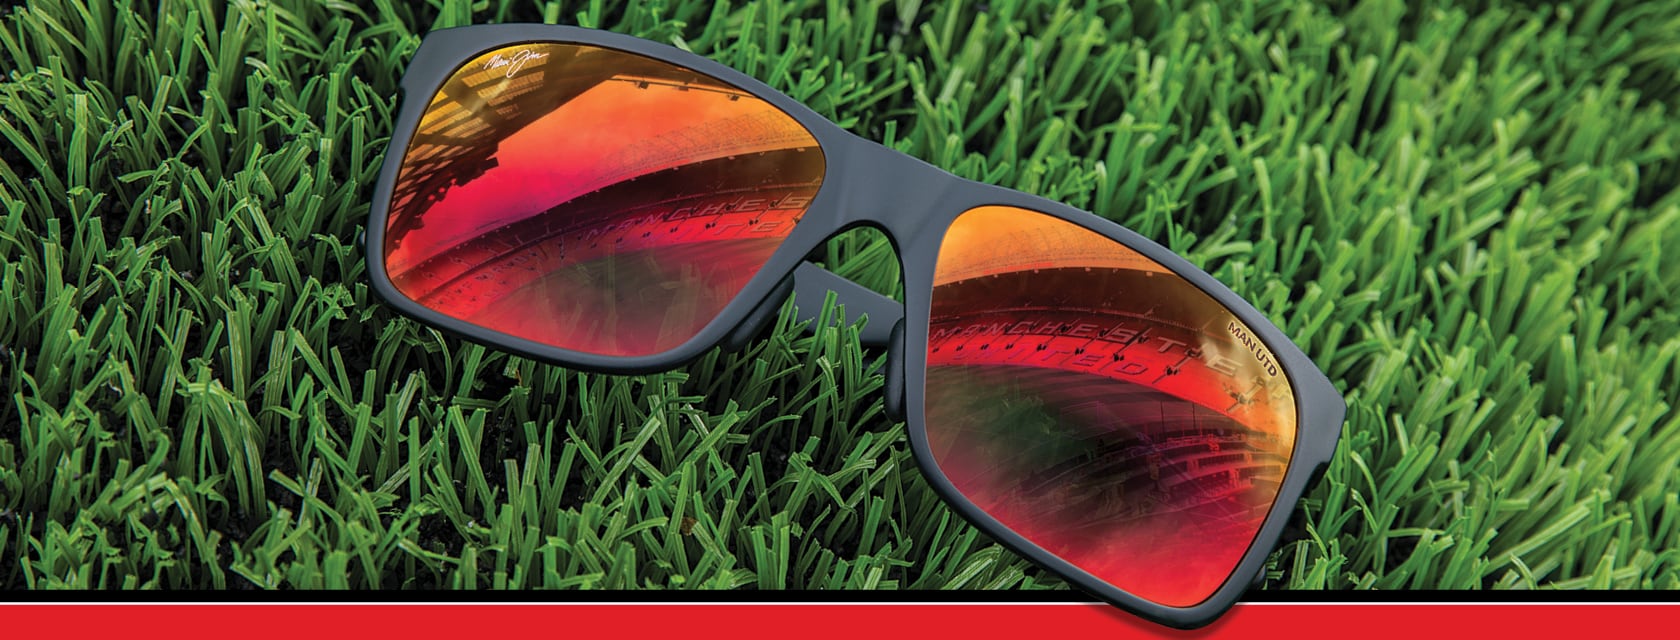 Red Sands sunglasses on grass, Manchester United stadium reflected from Hawaii Lava™ lens